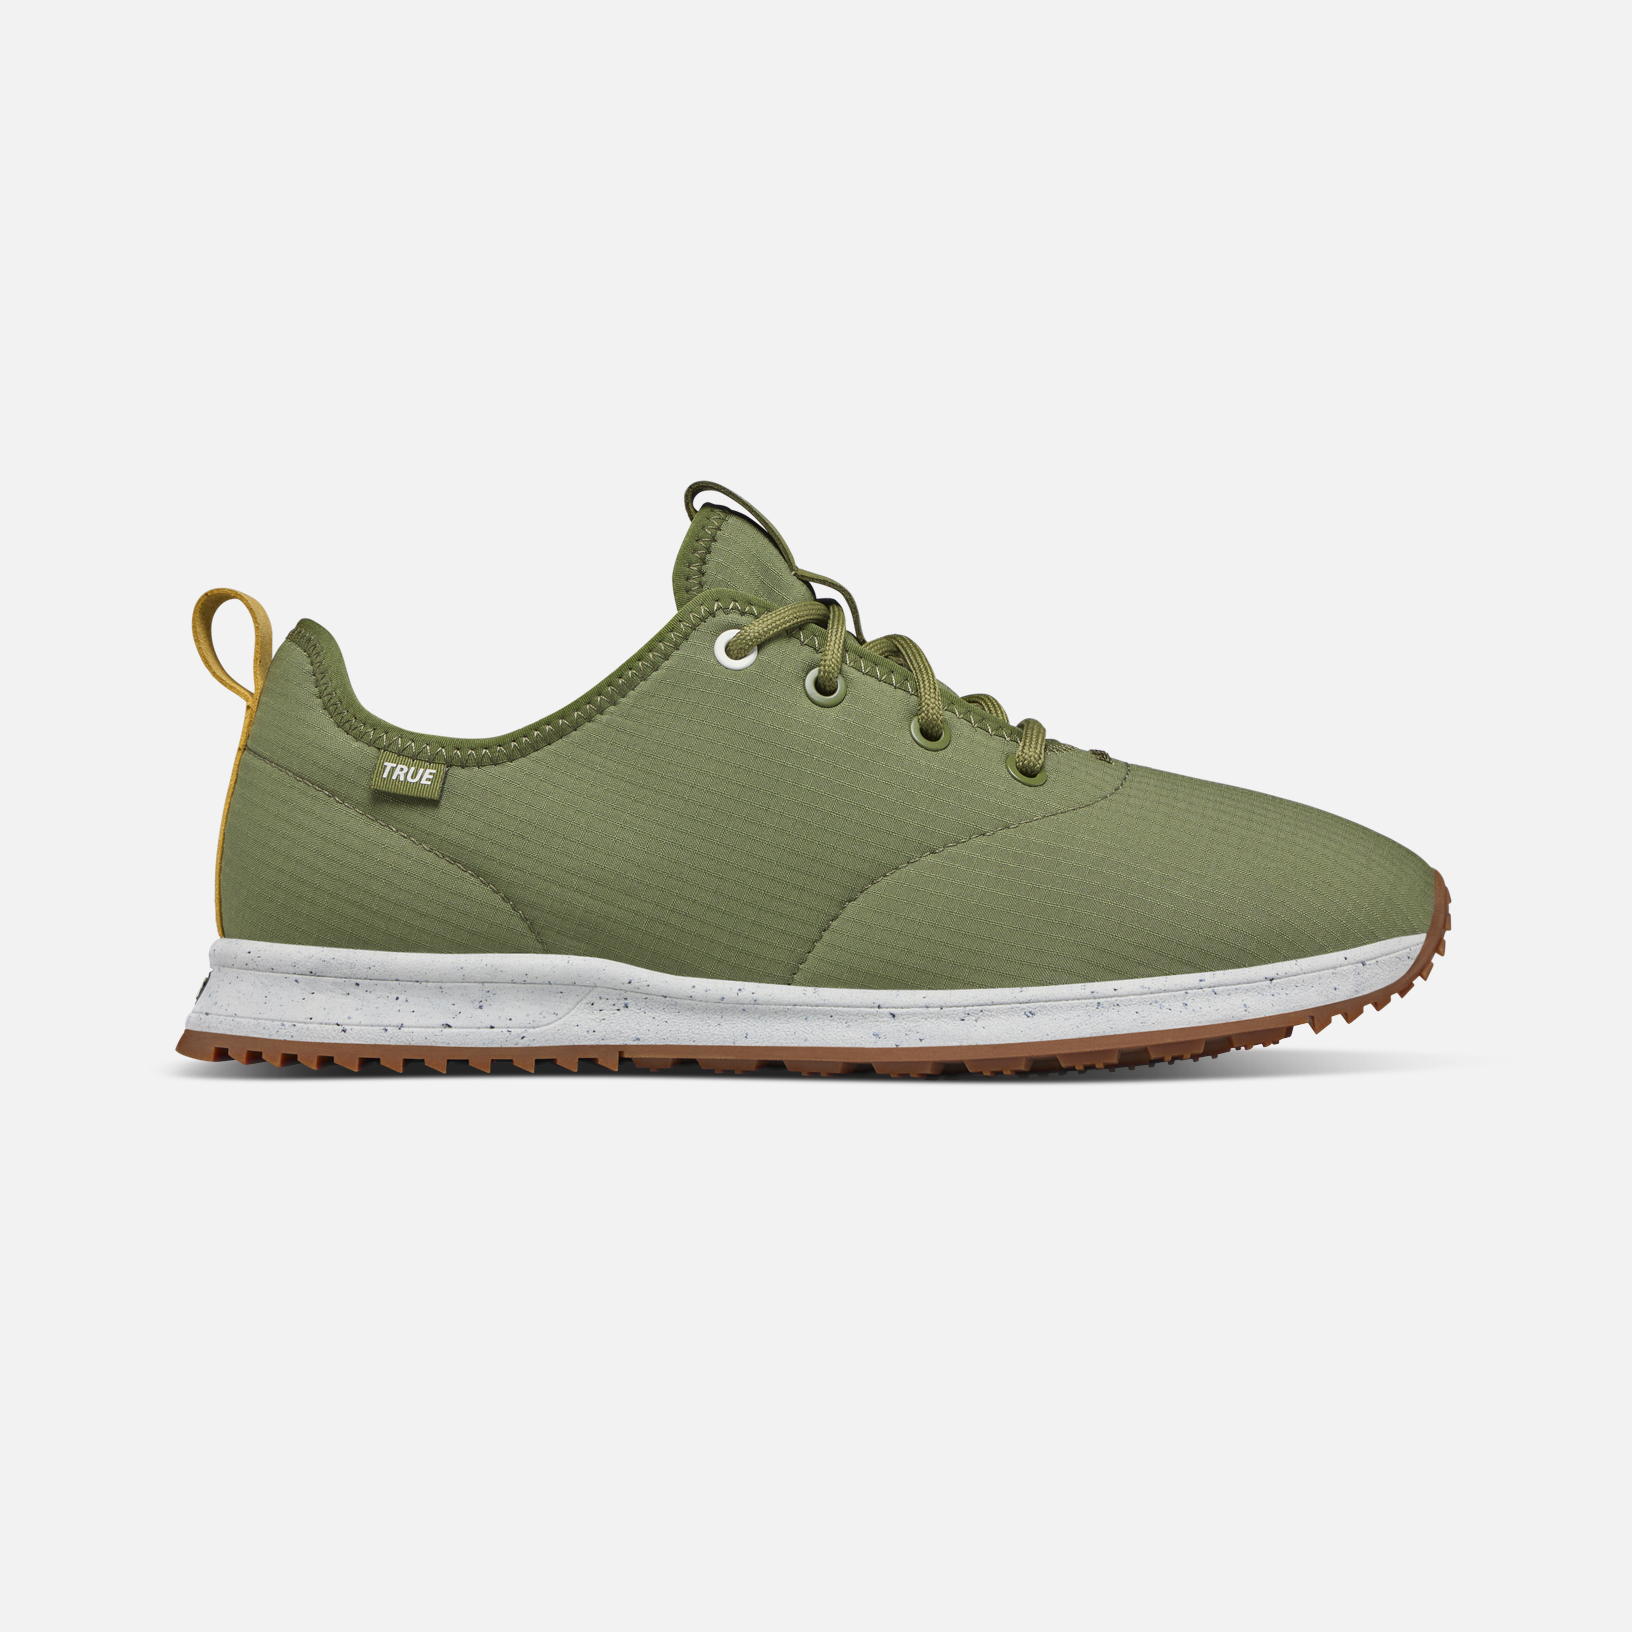 TRUE linkswear Golf Shoes | Men's Sustainable All Day Ripstop